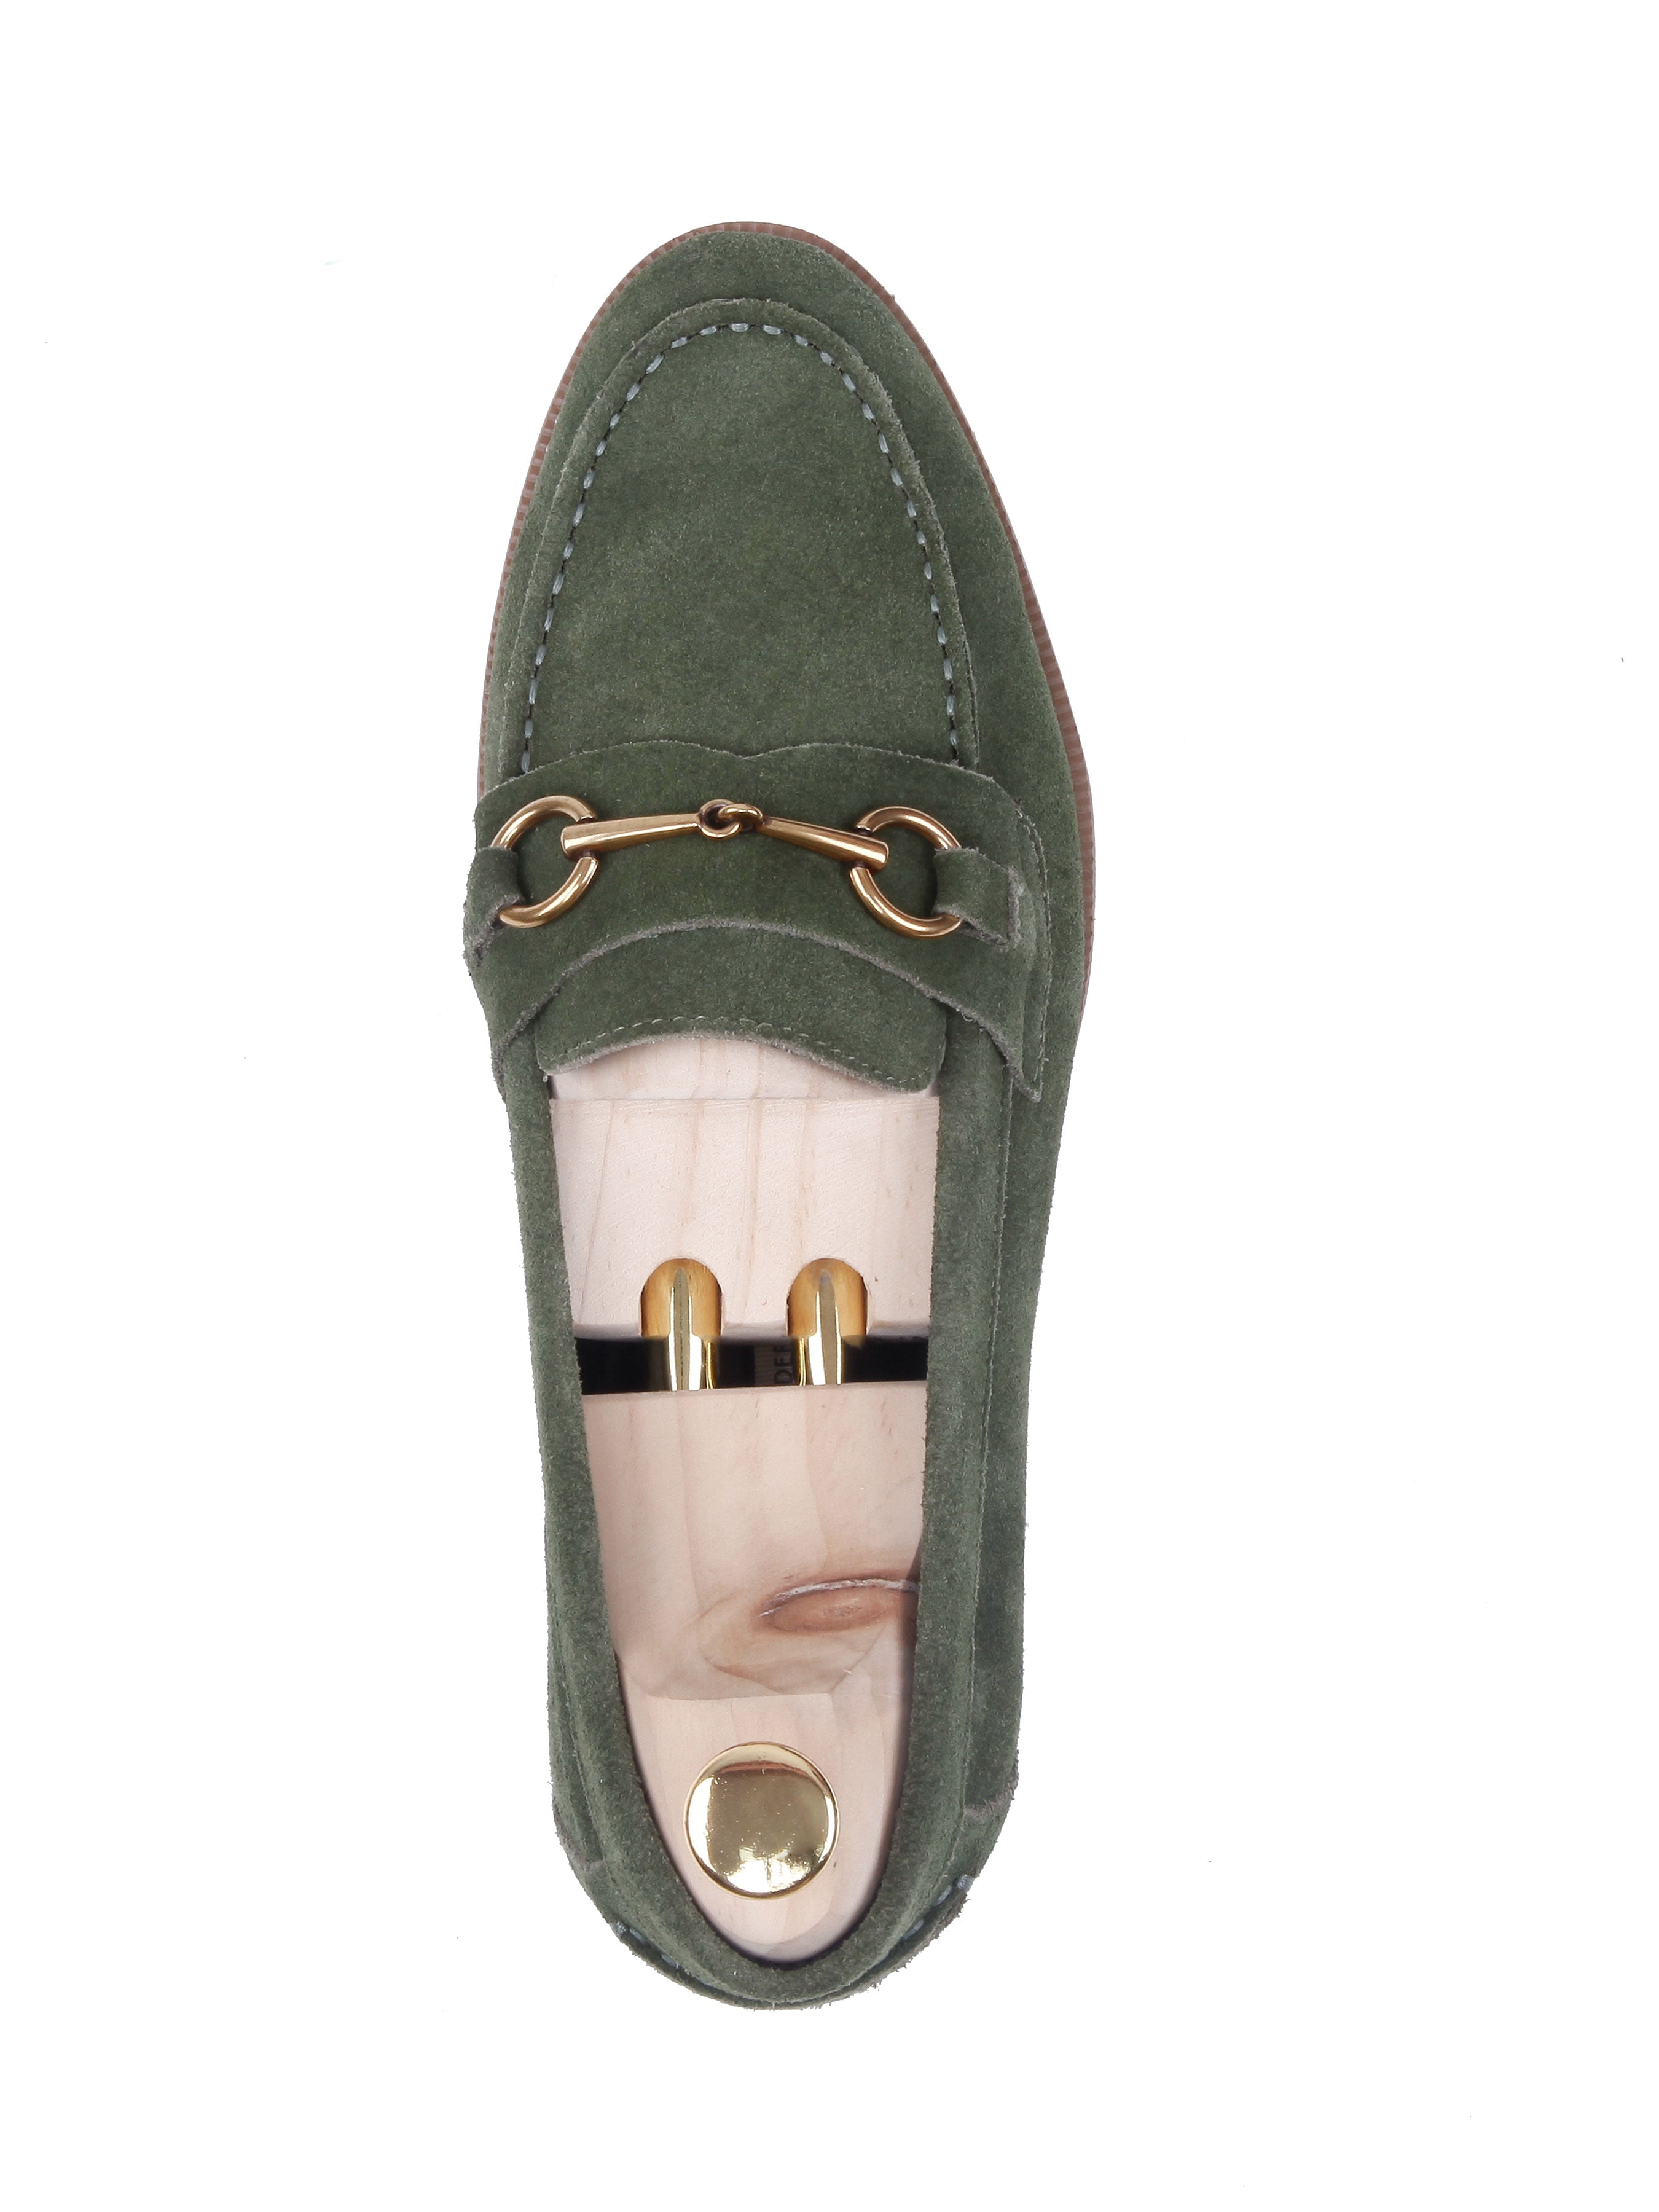 Penny Loafer Horsebit Buckle - Olive Green Suede Leather (Brown Crepe Sole) - Zeve Shoes